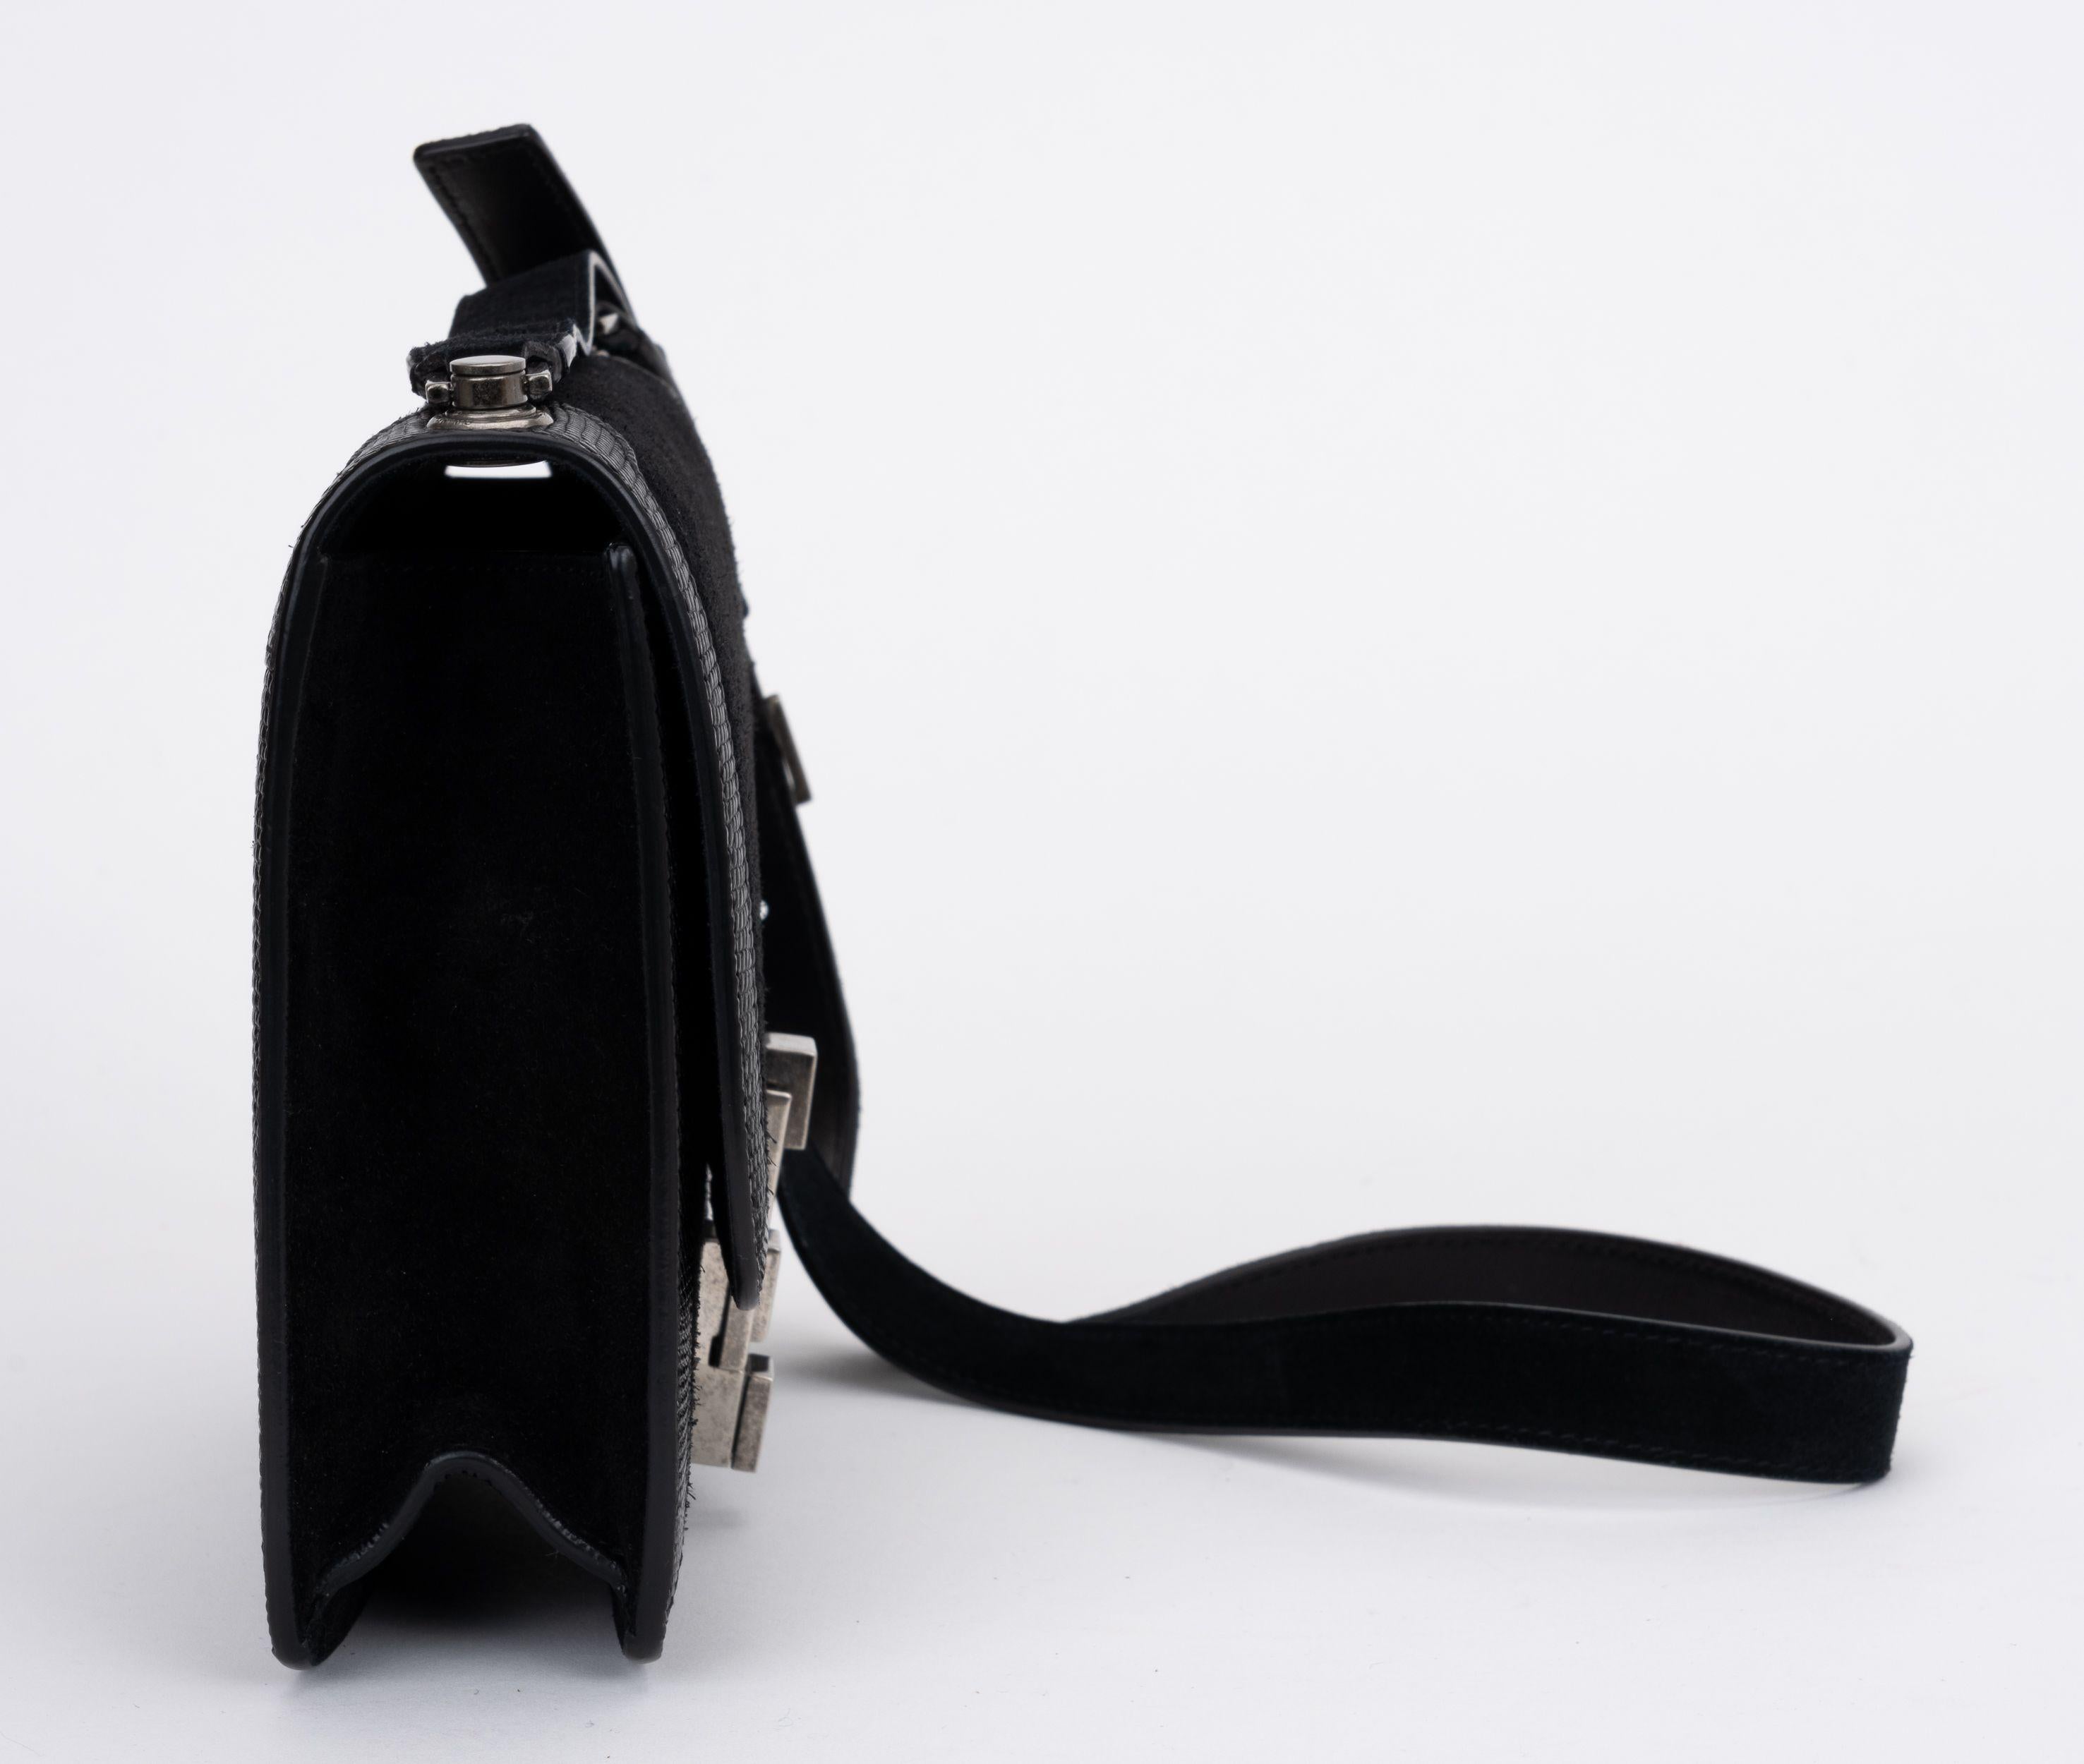 YSL New Black Suede Cross Body Bag In New Condition For Sale In West Hollywood, CA